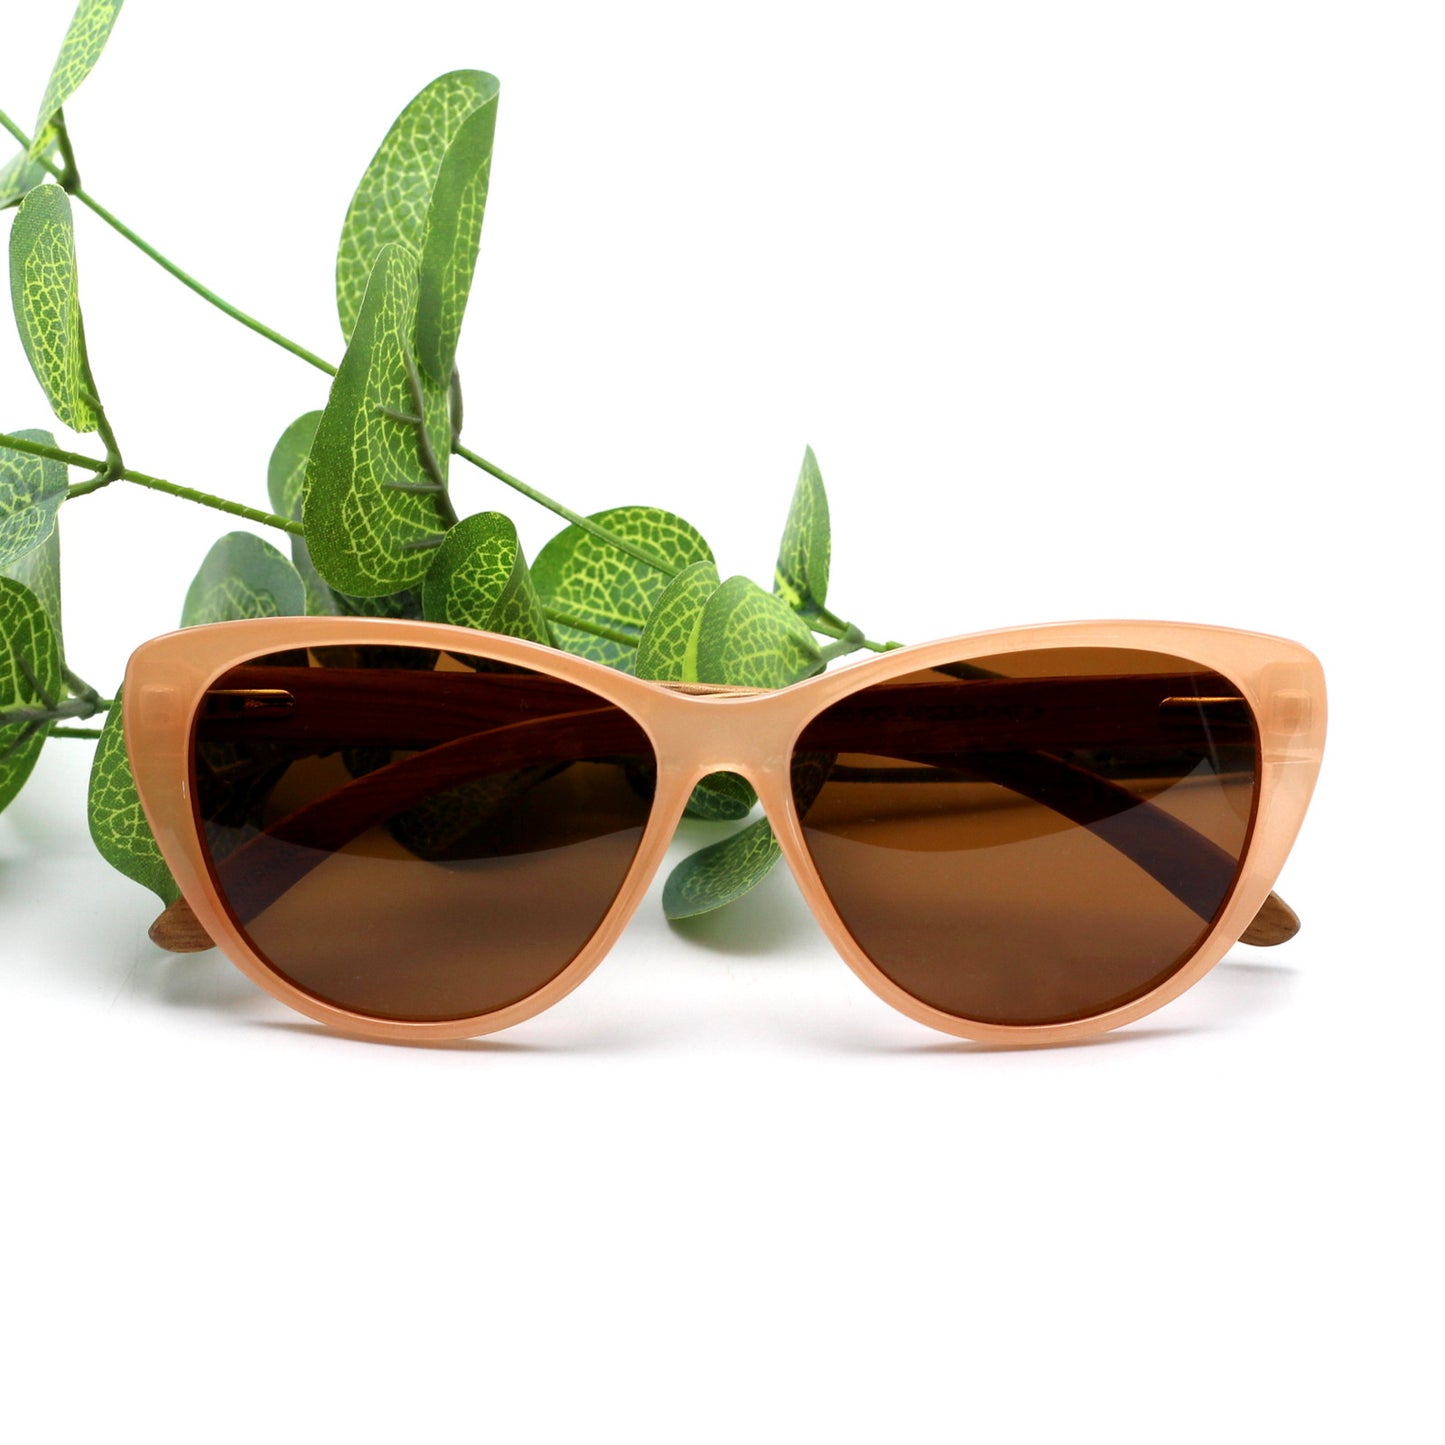 The new, oh-so-flattering Callies in oh-so-trendy pastel nude frame with polarized brown lens and zebrawood wooden arms.